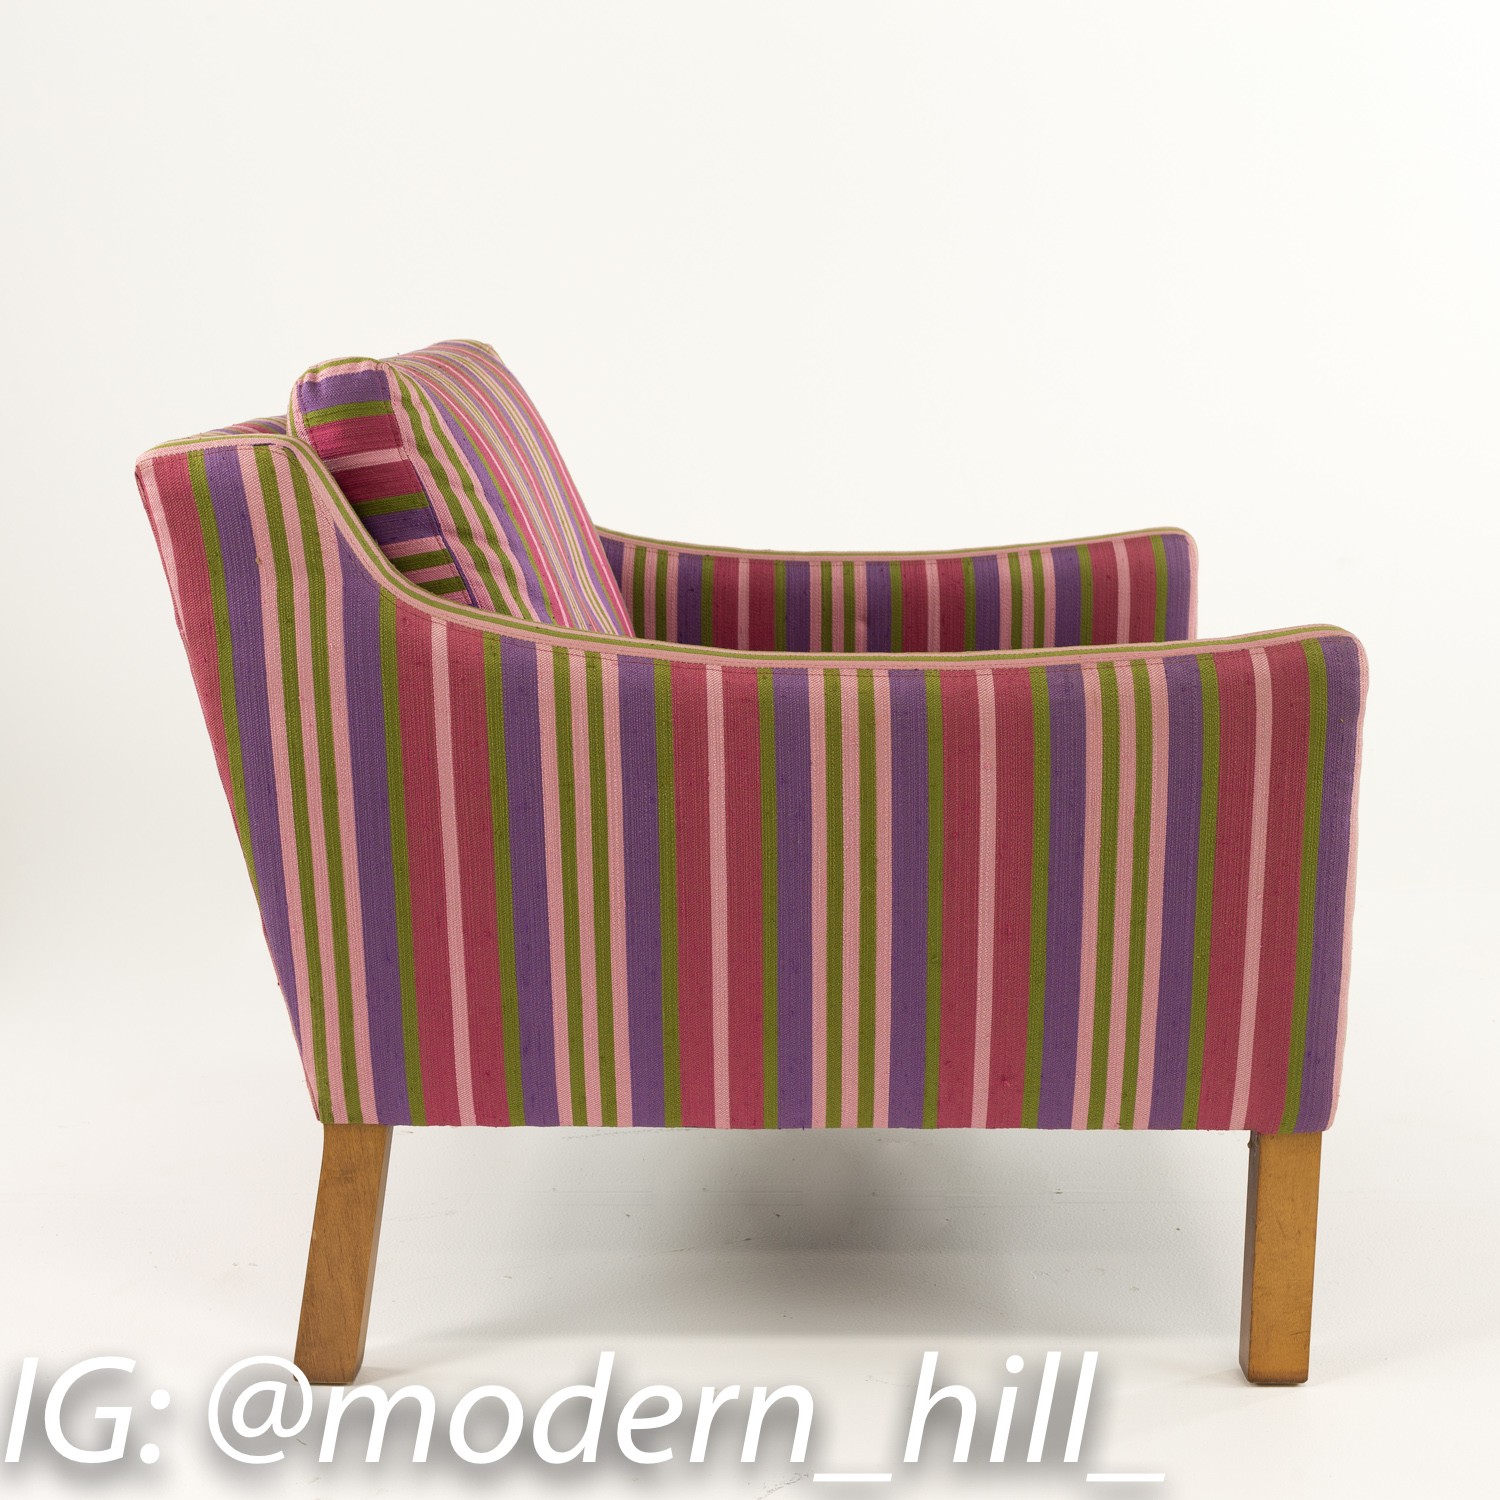 Borge Mogensen Model 2207 for Federicia Style Mid-century Modern Lounge Chairs